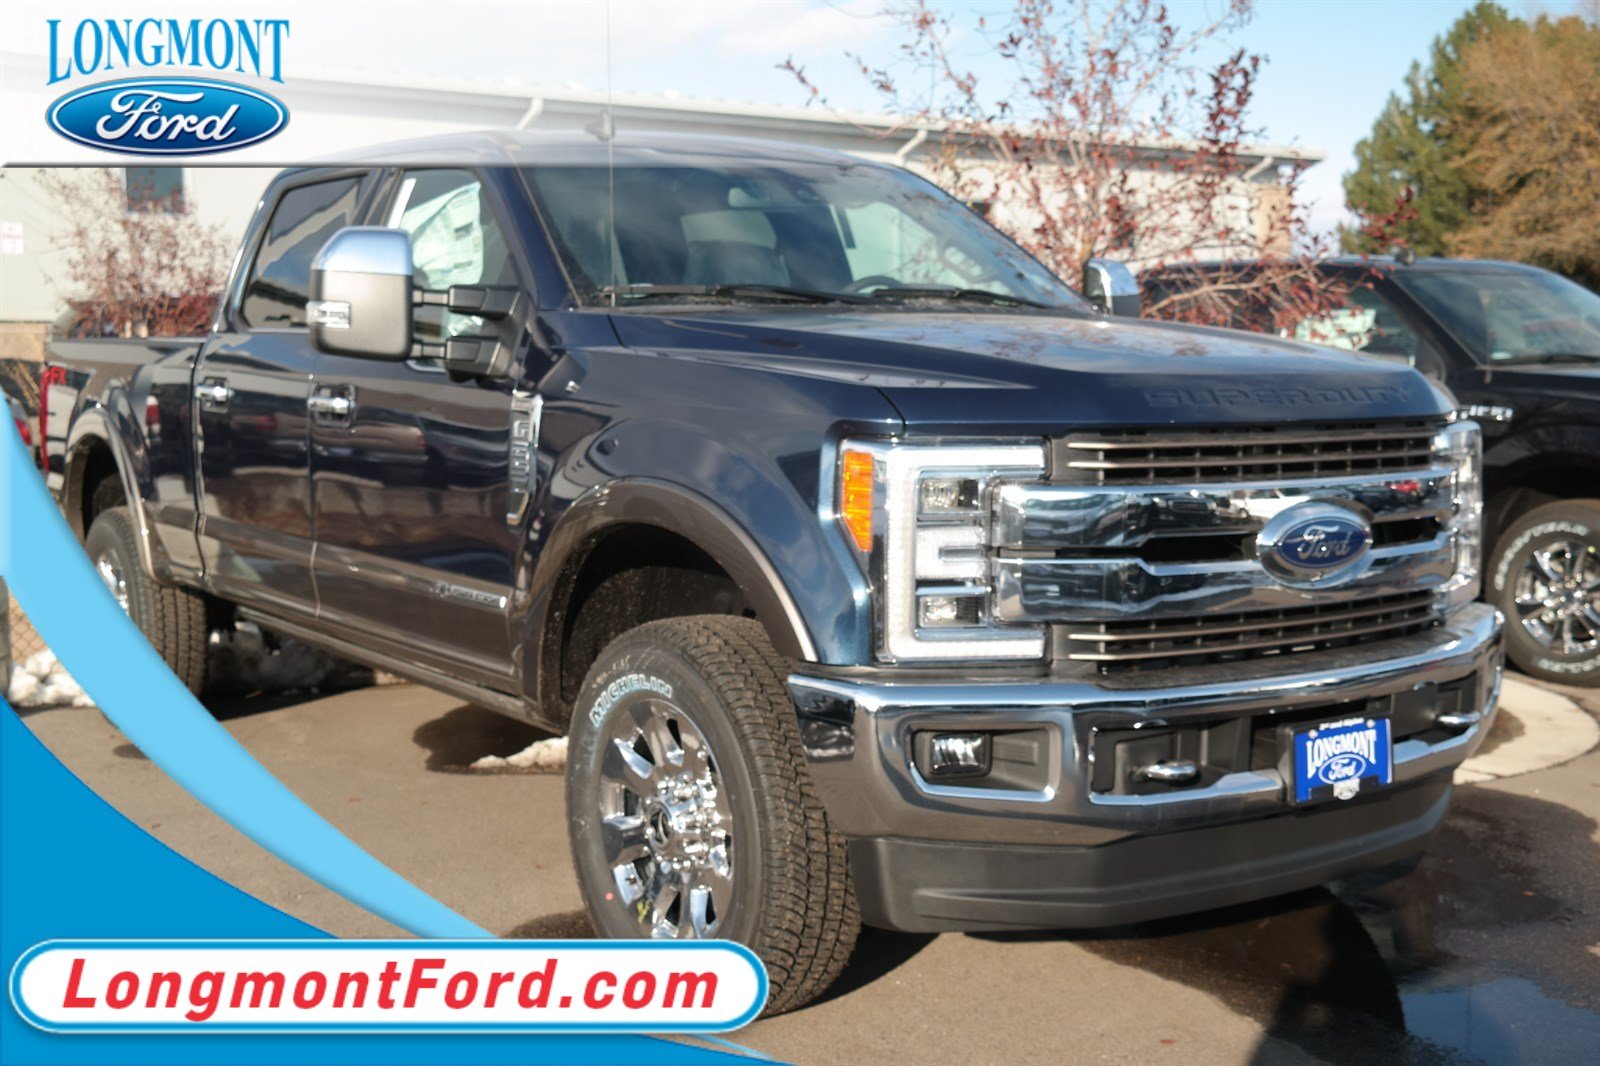 New 2019 Ford Super Duty F 250 Srw King Ranch With Navigation 4wd